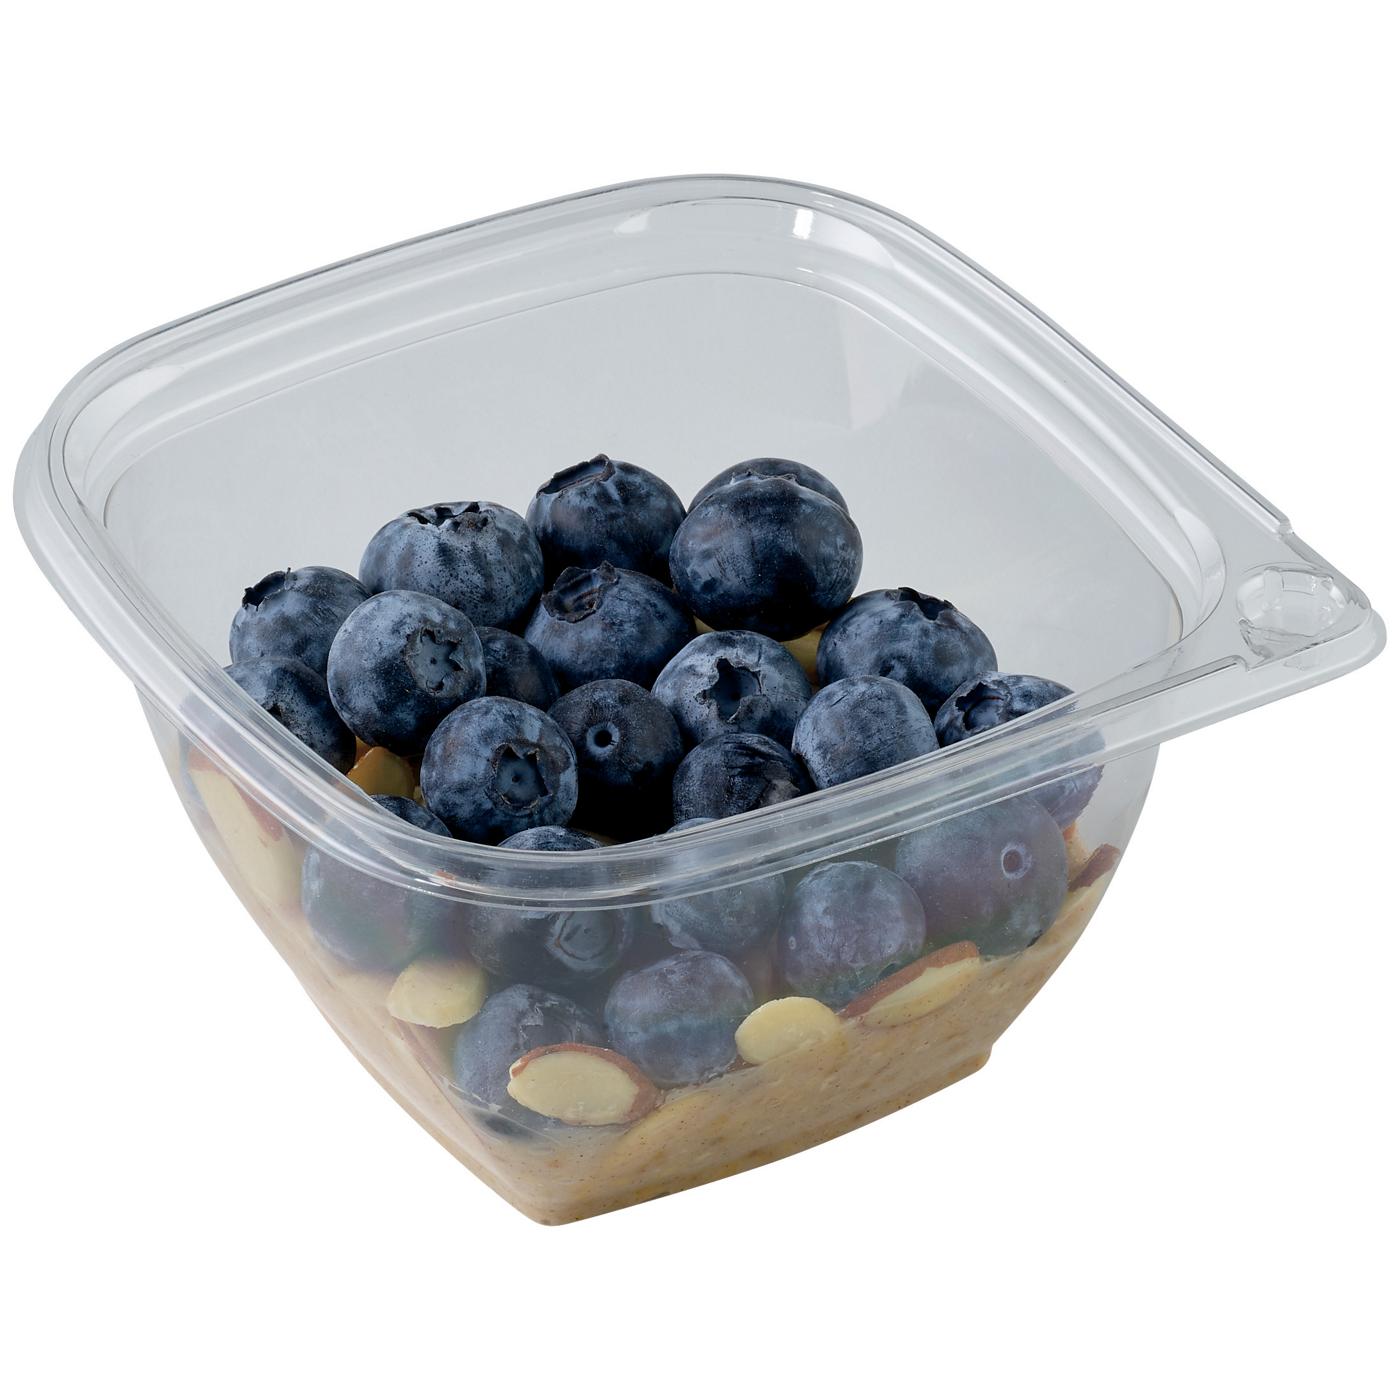 Meal Simple by H-E-B Overnight Oats - Blueberry & Almonds (Sold Cold); image 1 of 3